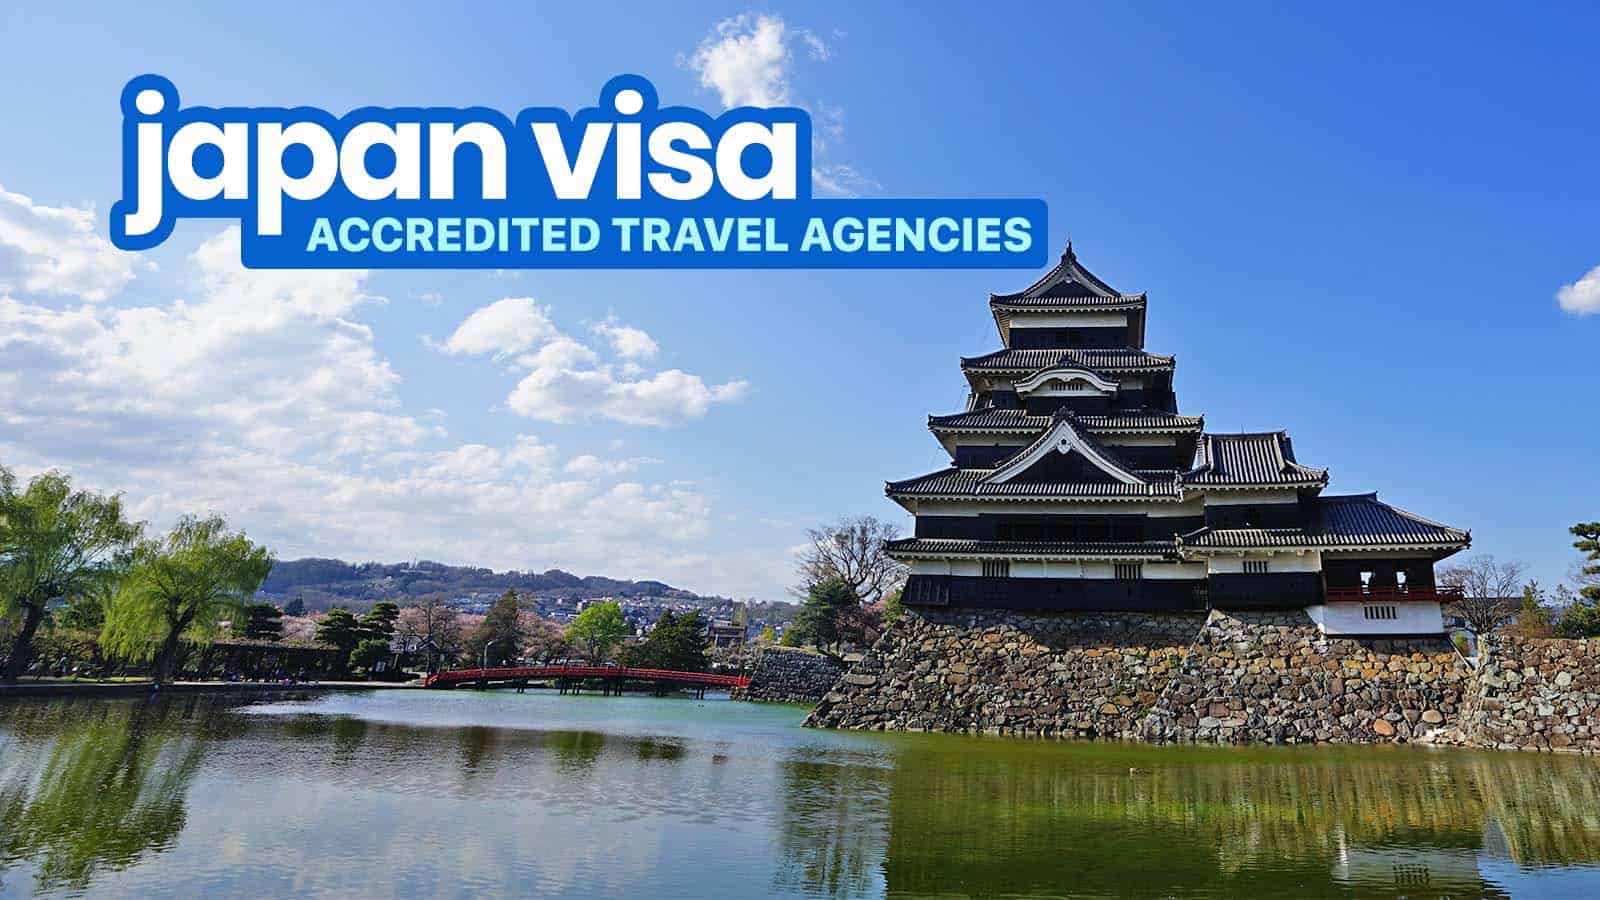 JAPAN VISA LIST OF TRAVEL AGENCIES Accredited by the Embassy The